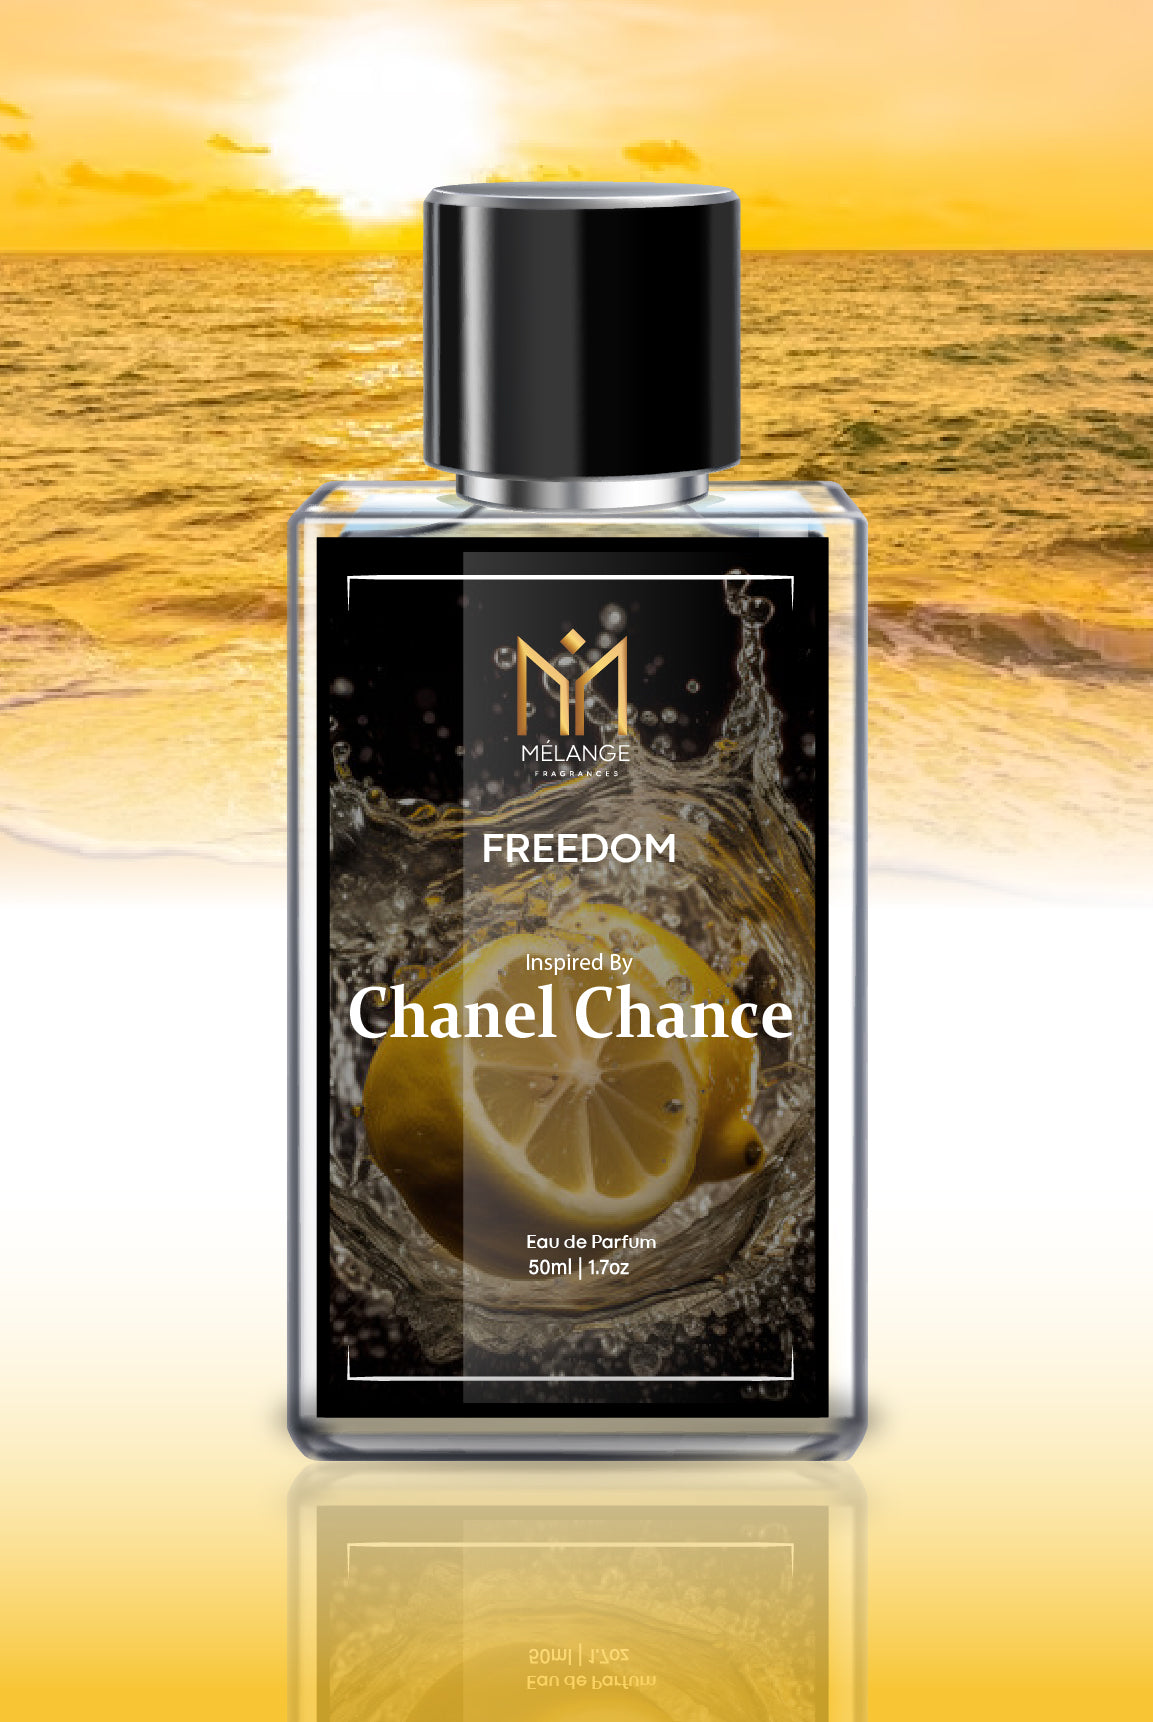 FREEDOM - Inspired by Chanel Chance